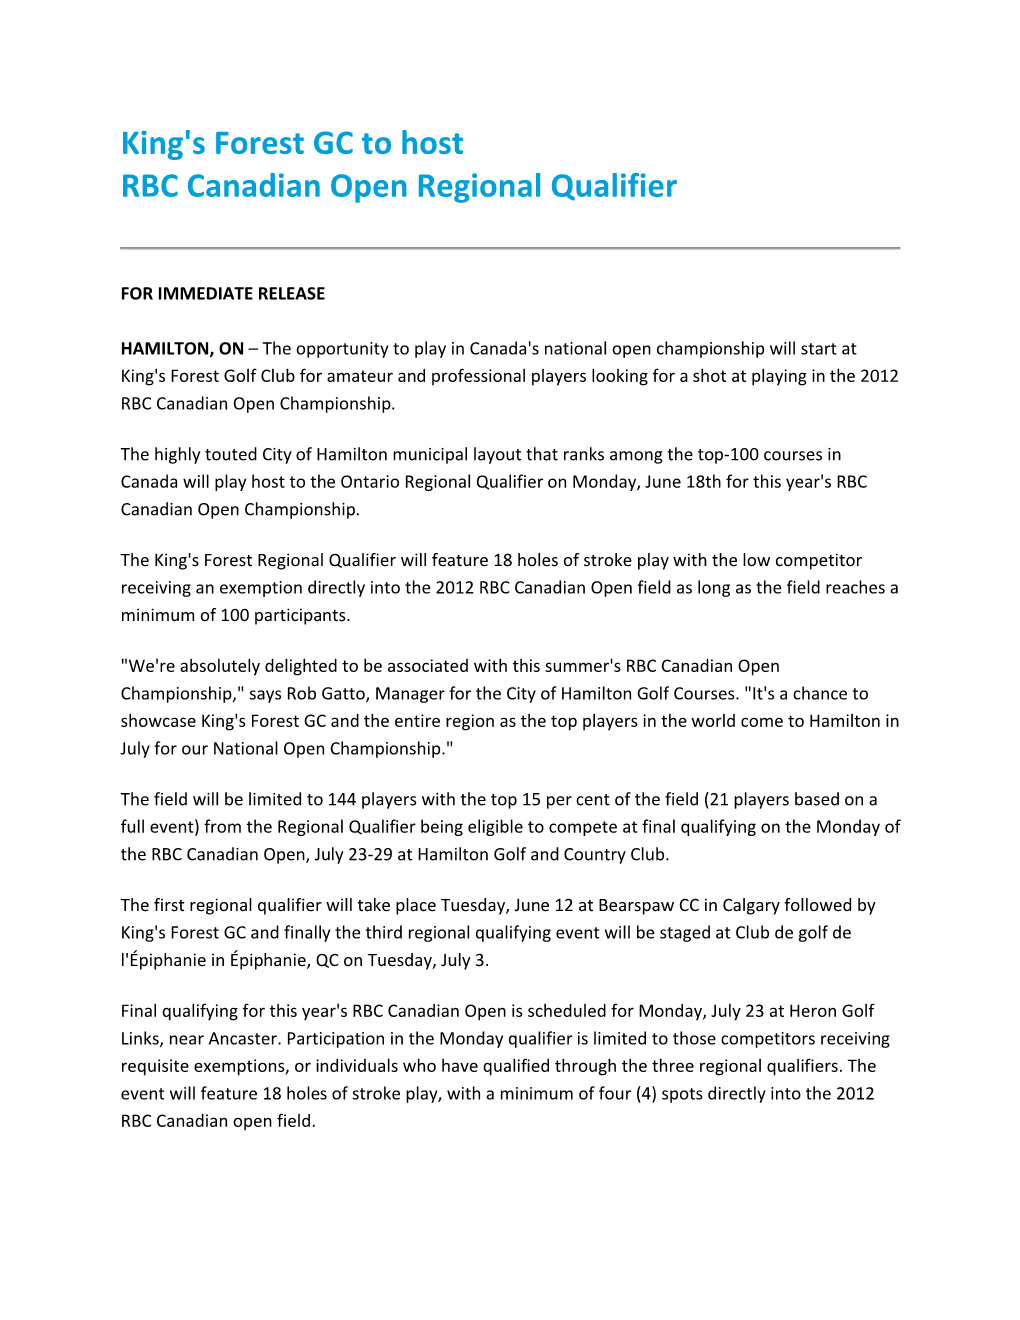 King's Forest GC to Host RBC Canadian Open Regional Qualifier